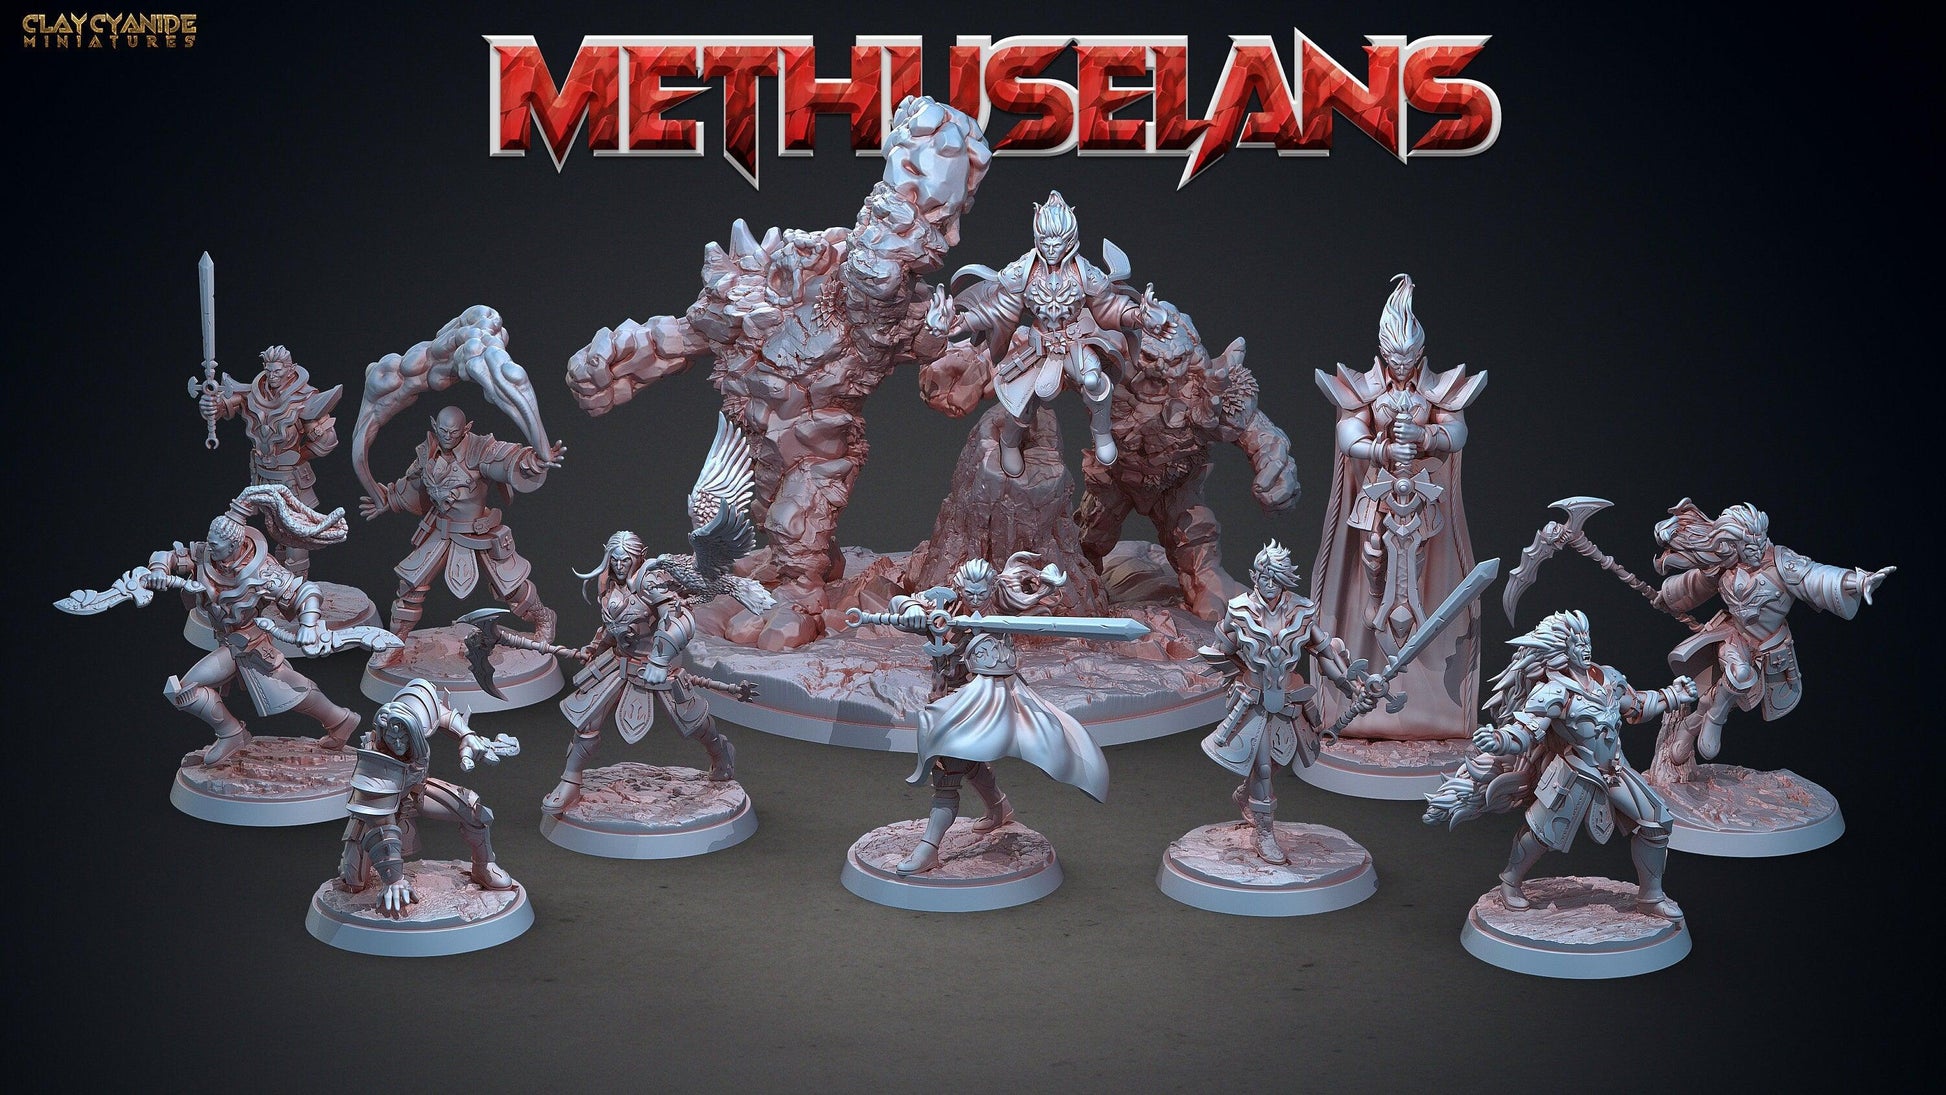 Vampire miniature | Absalom Clay Cyanide | Methuselans | Tabletop Gaming | DnD Miniature | Dungeons and Dragons , DnD 5e - Plague Miniatures shop for DnD Miniatures